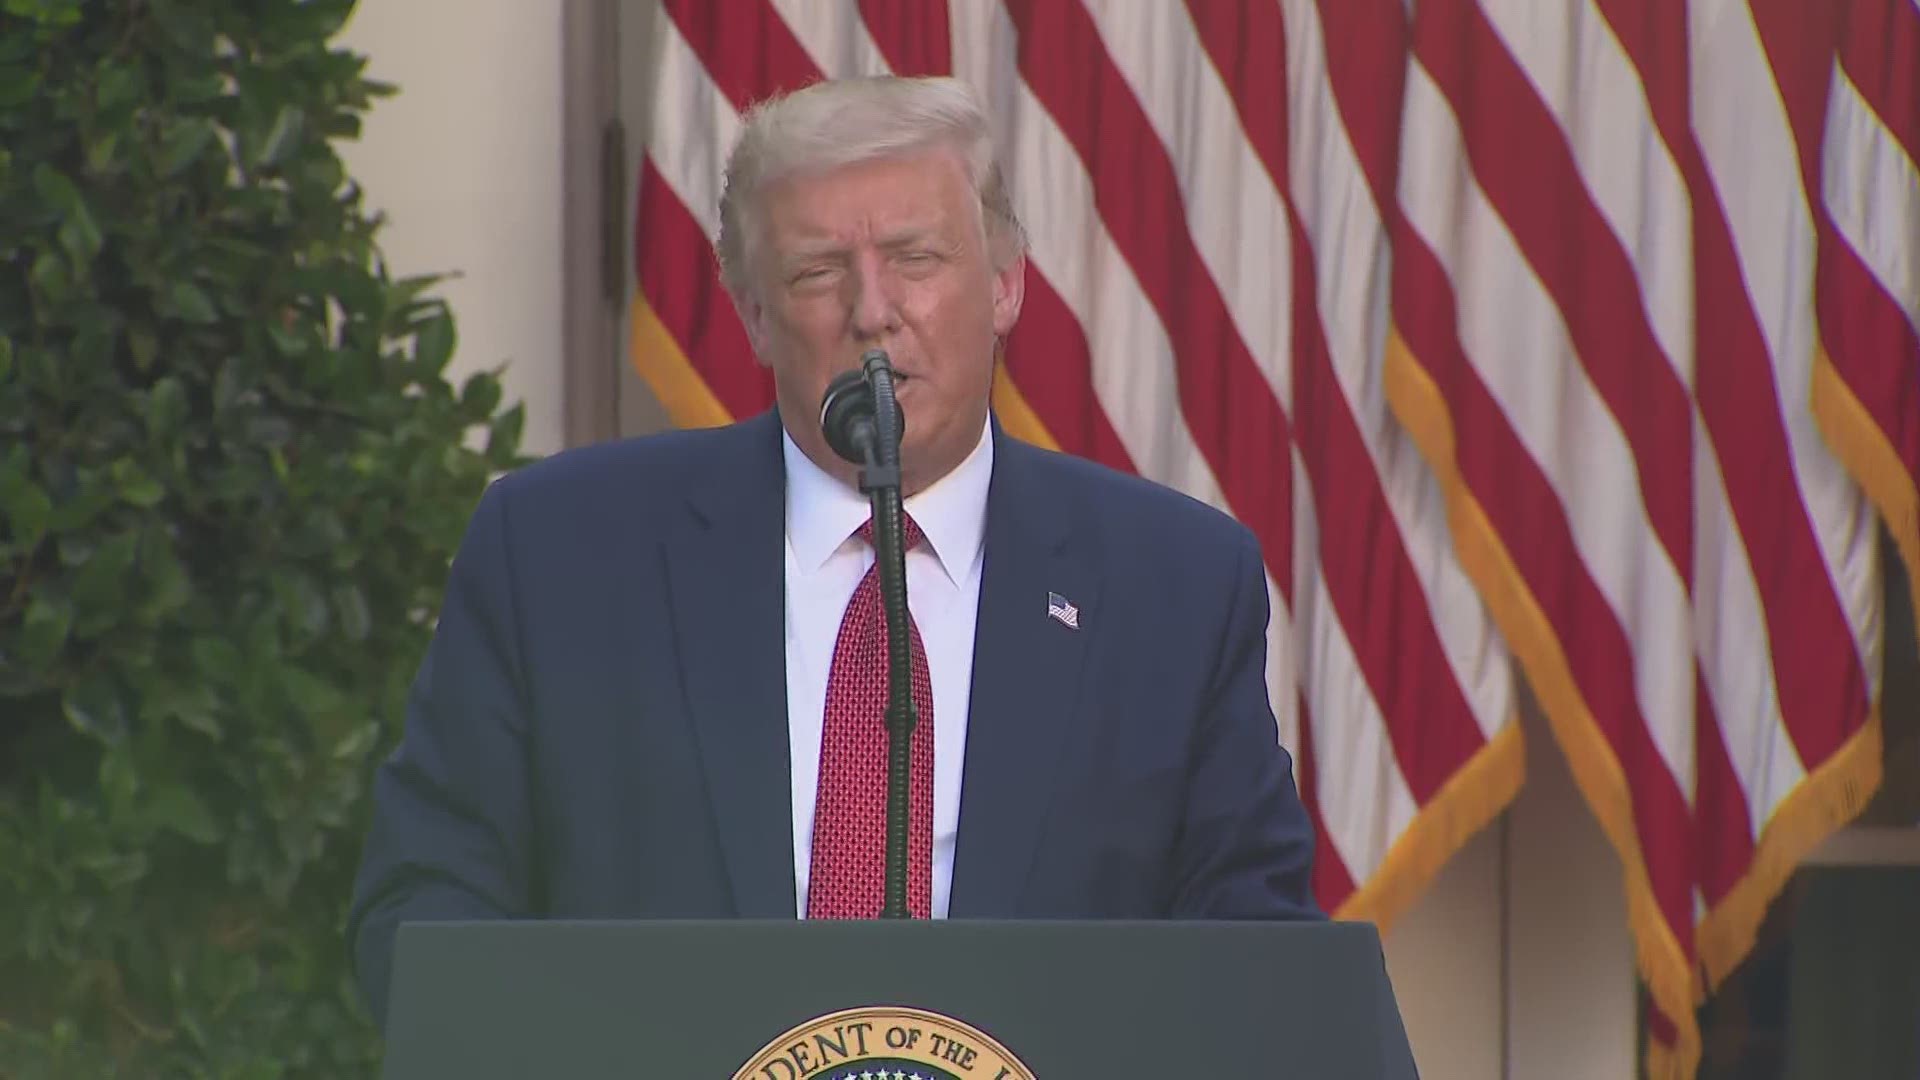 At a Tuesday briefing in the Rose Garden of the White House Trump addressed several top issues facing the U.S., including the strained relationship with China.